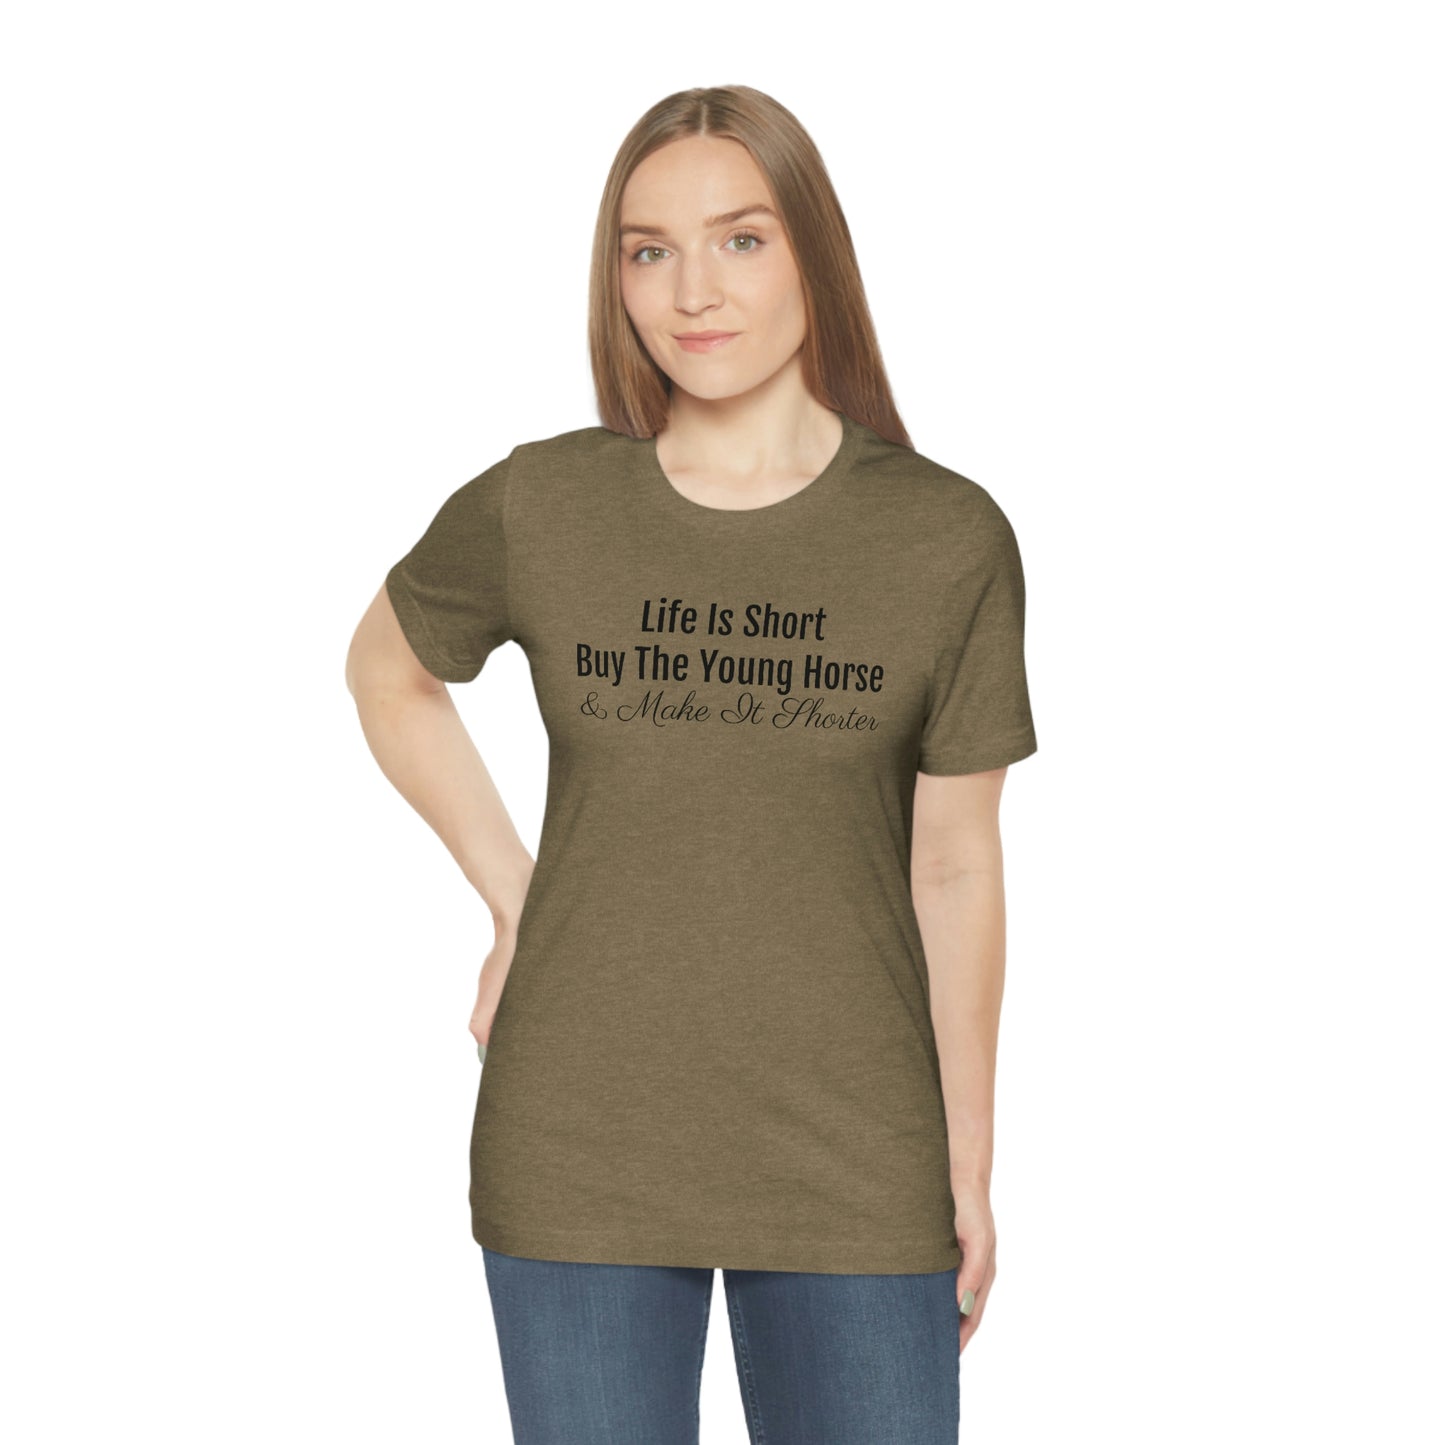 Shirt - Life is Short, Buy the Young Horse & Make it Shorter